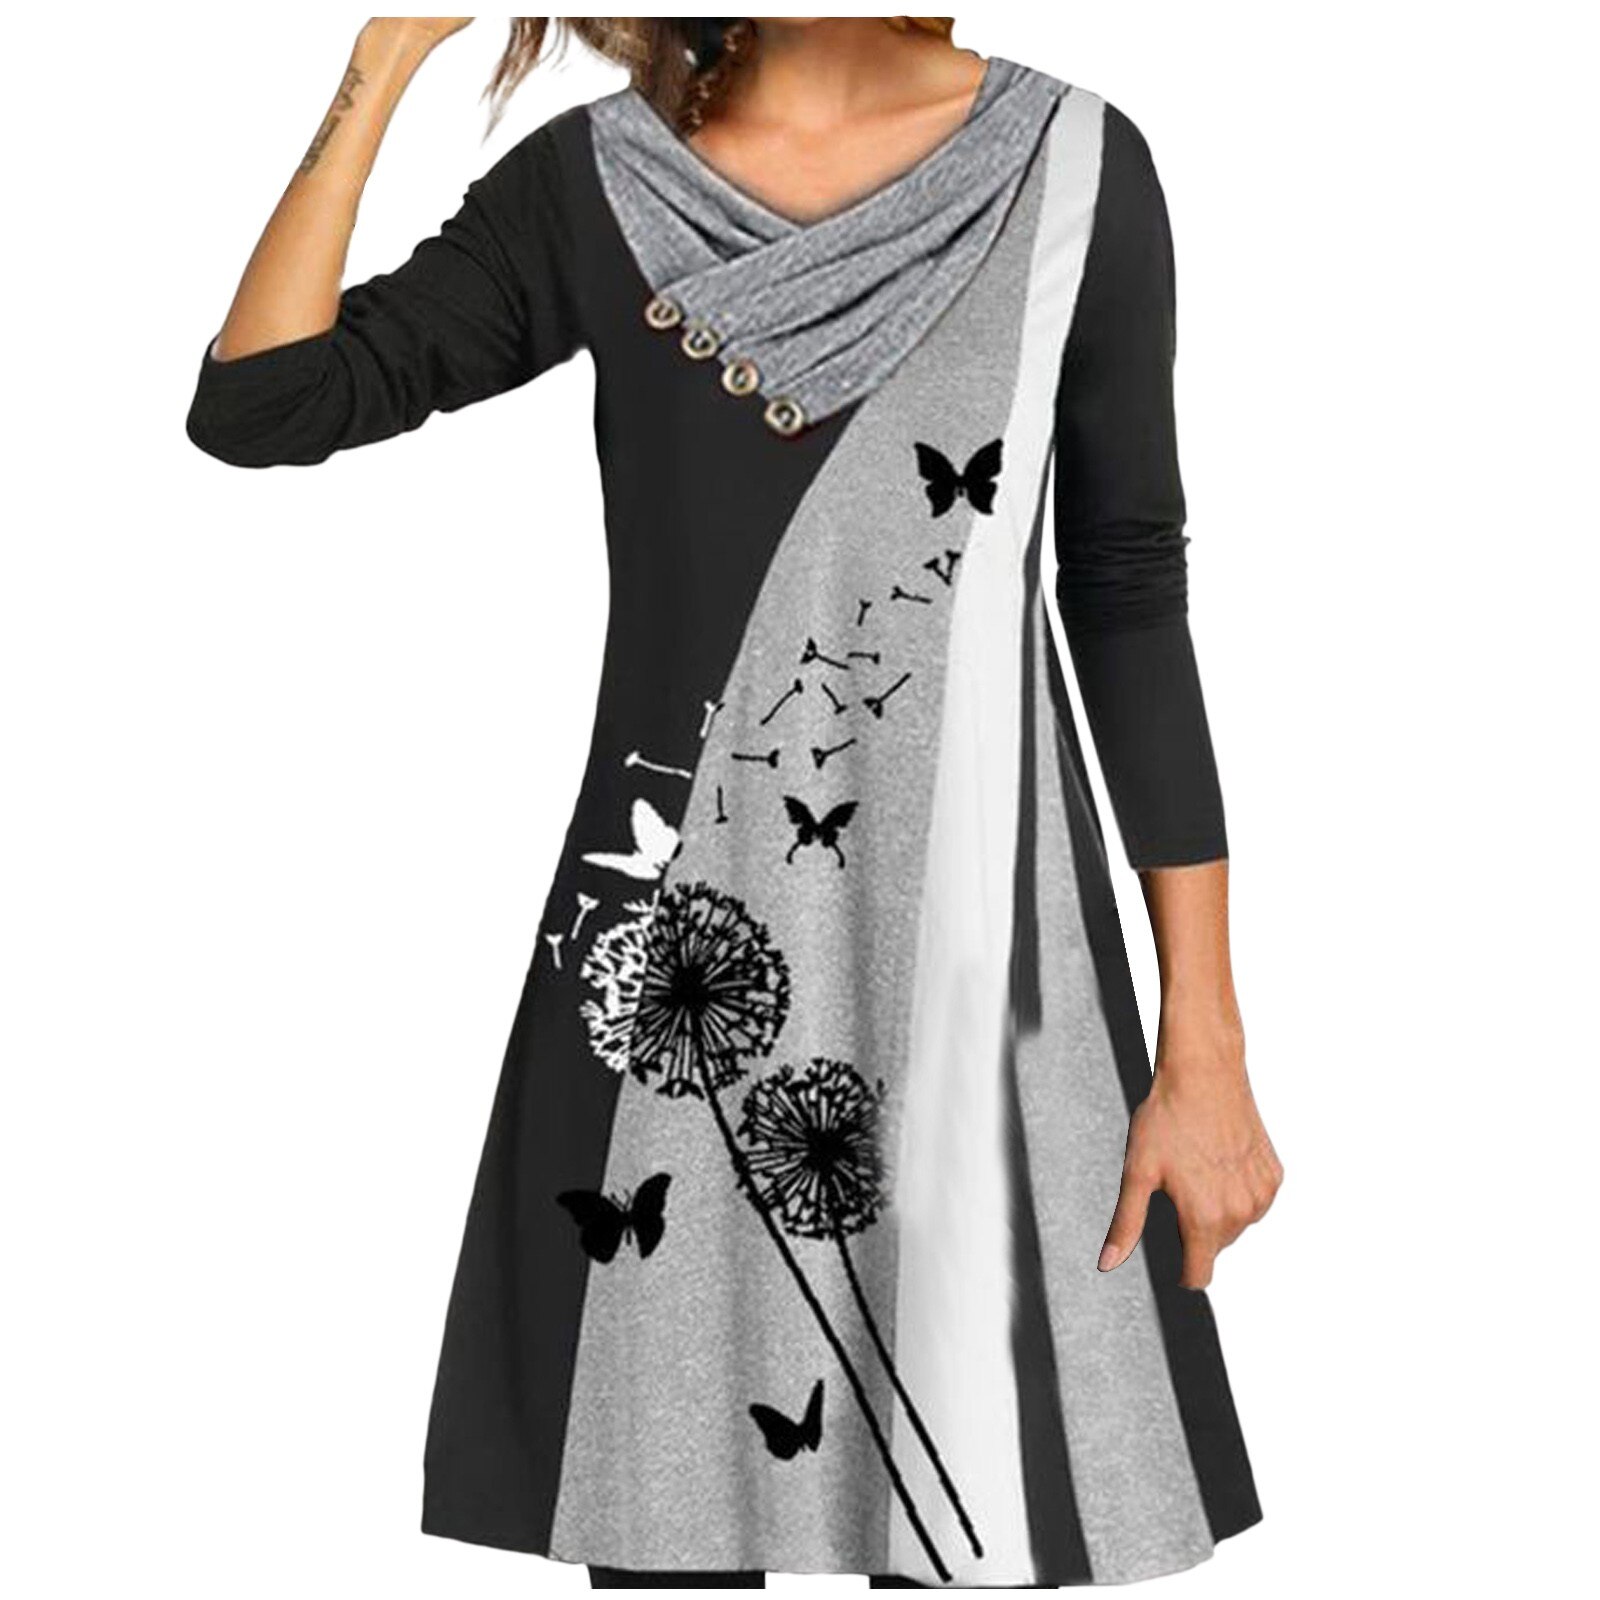 Elegant Dresses For Women's Loose Print Stitching Button Double-layer Collar Long-sleeved Dress